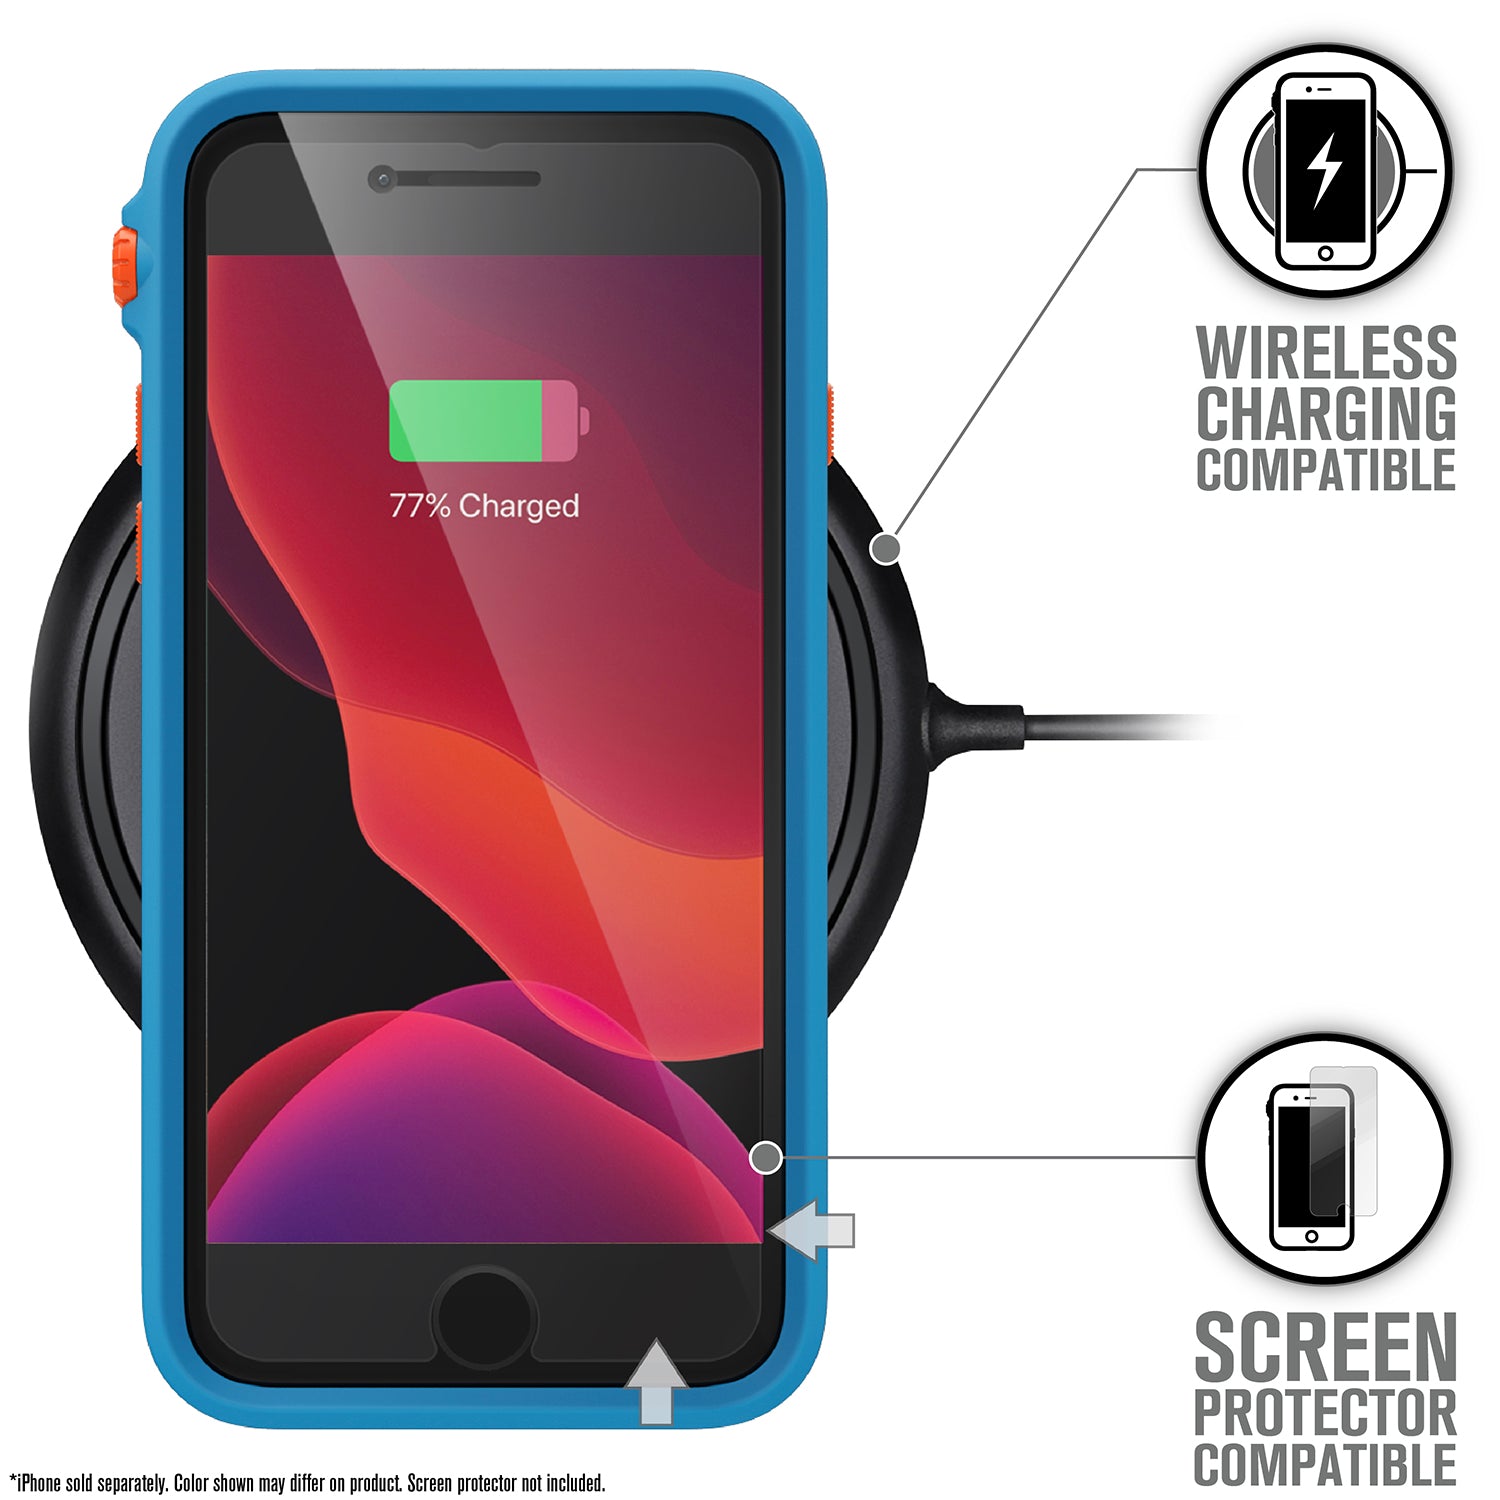 Catalyst iphone 8/7 impact protection case showing wireless charging in a blueridge sunset colorway text reads wireless charging compatible screen protector compatible